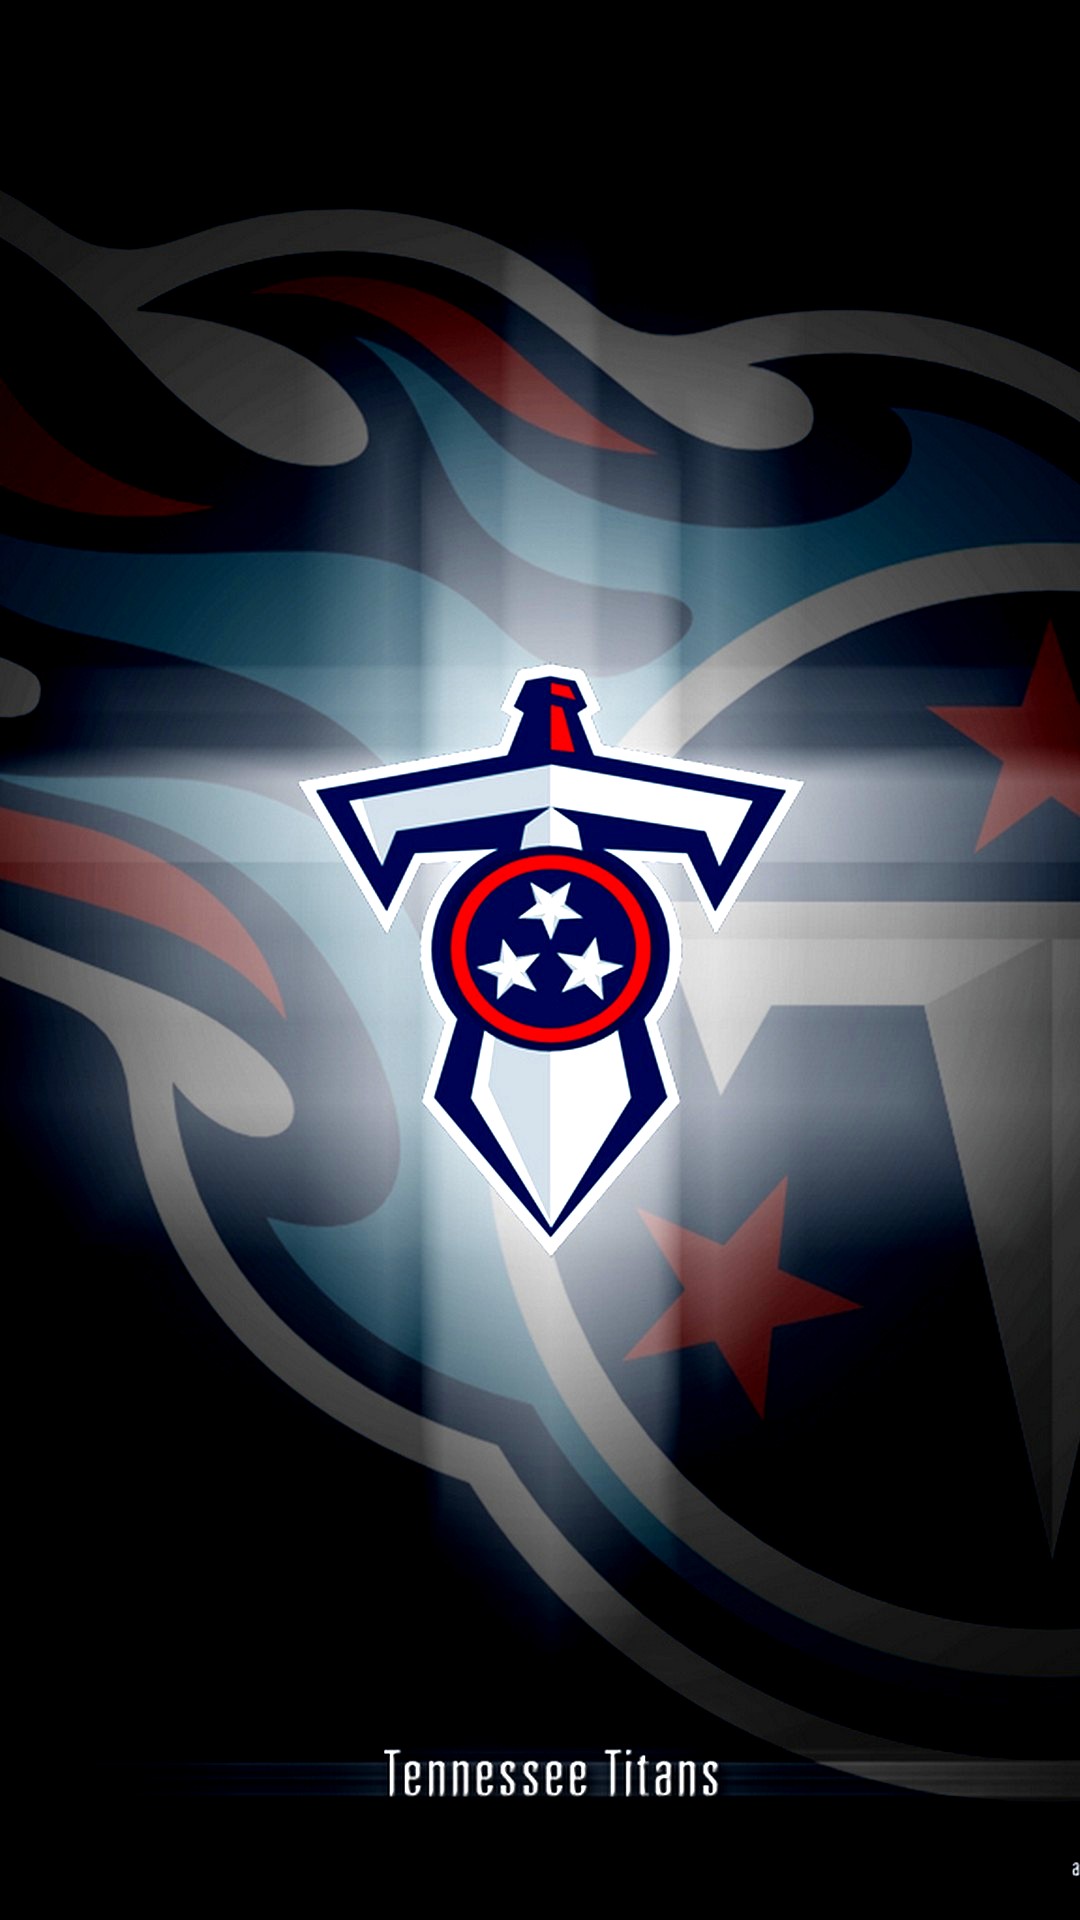 Tennessee Titans iPhone Wallpaper New With high-resolution 1080X1920 pixel. Donwload and set as wallpaper for your iPhone X, iPhone XS home screen backgrounds, XS Max, XR, iPhone8 lock screen wallpaper, iPhone 7, 6, SE, and other mobile devices